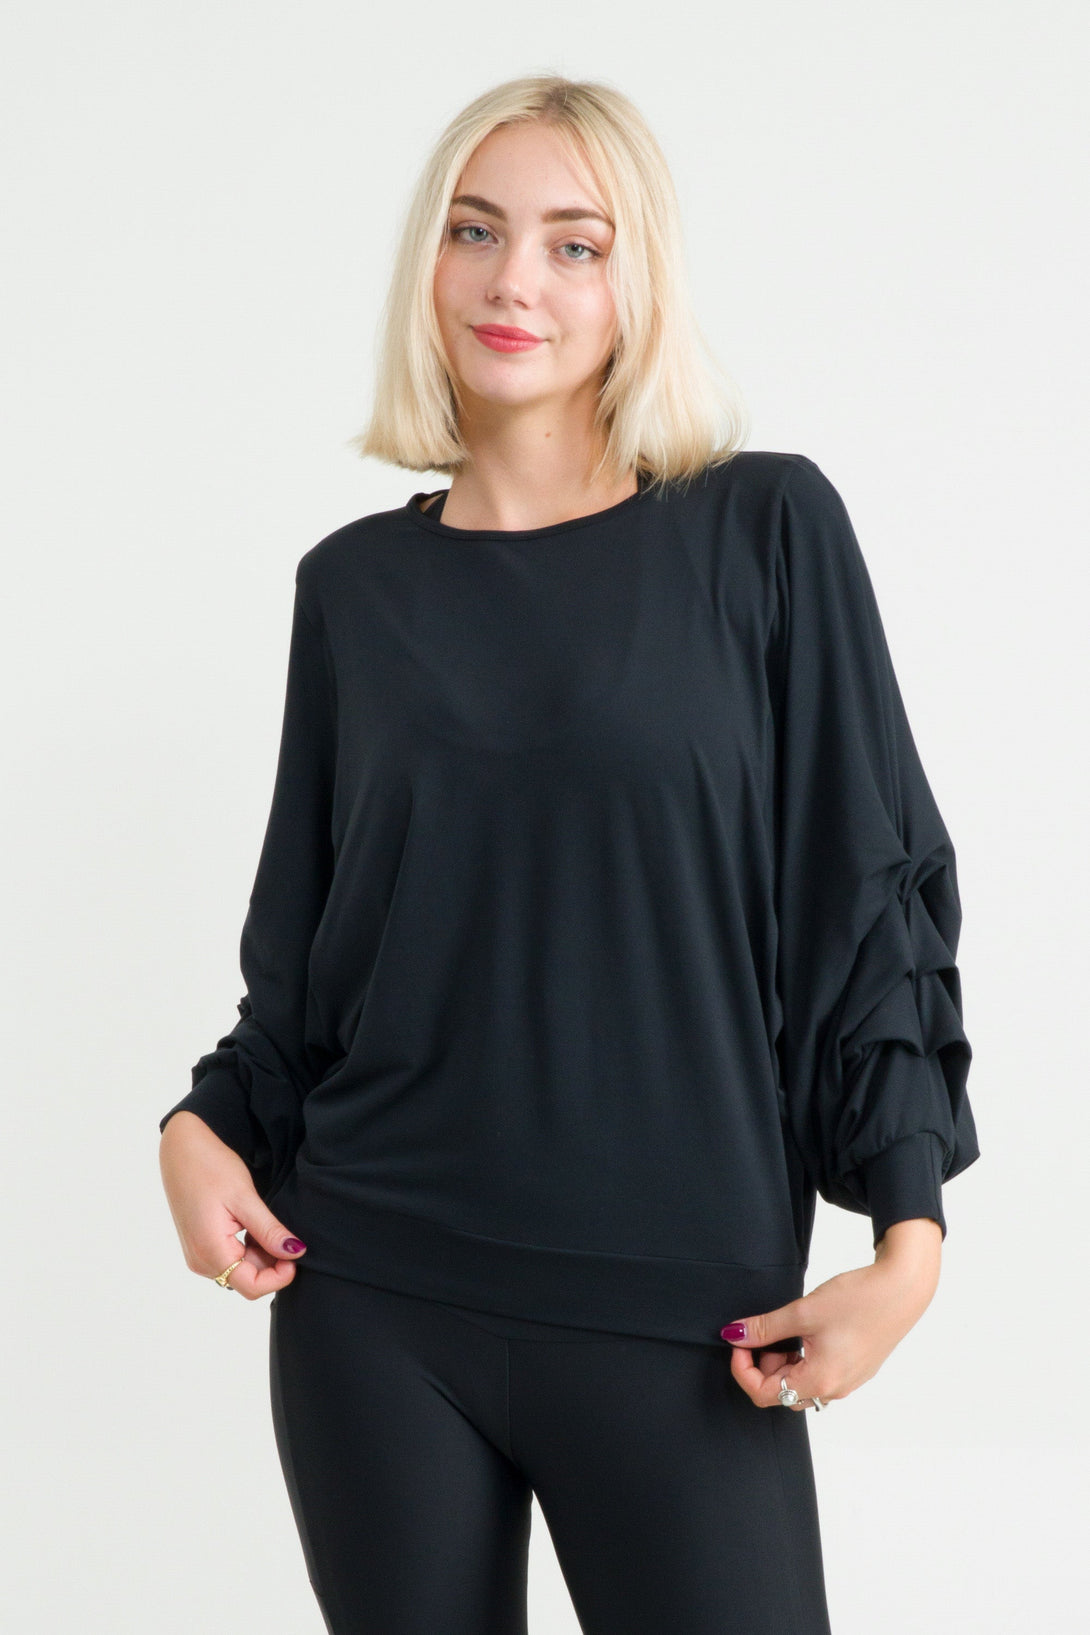 Black Soft To Touch - Batwing Cinched Sleeve Sweater-Activewear-Exoticathletica